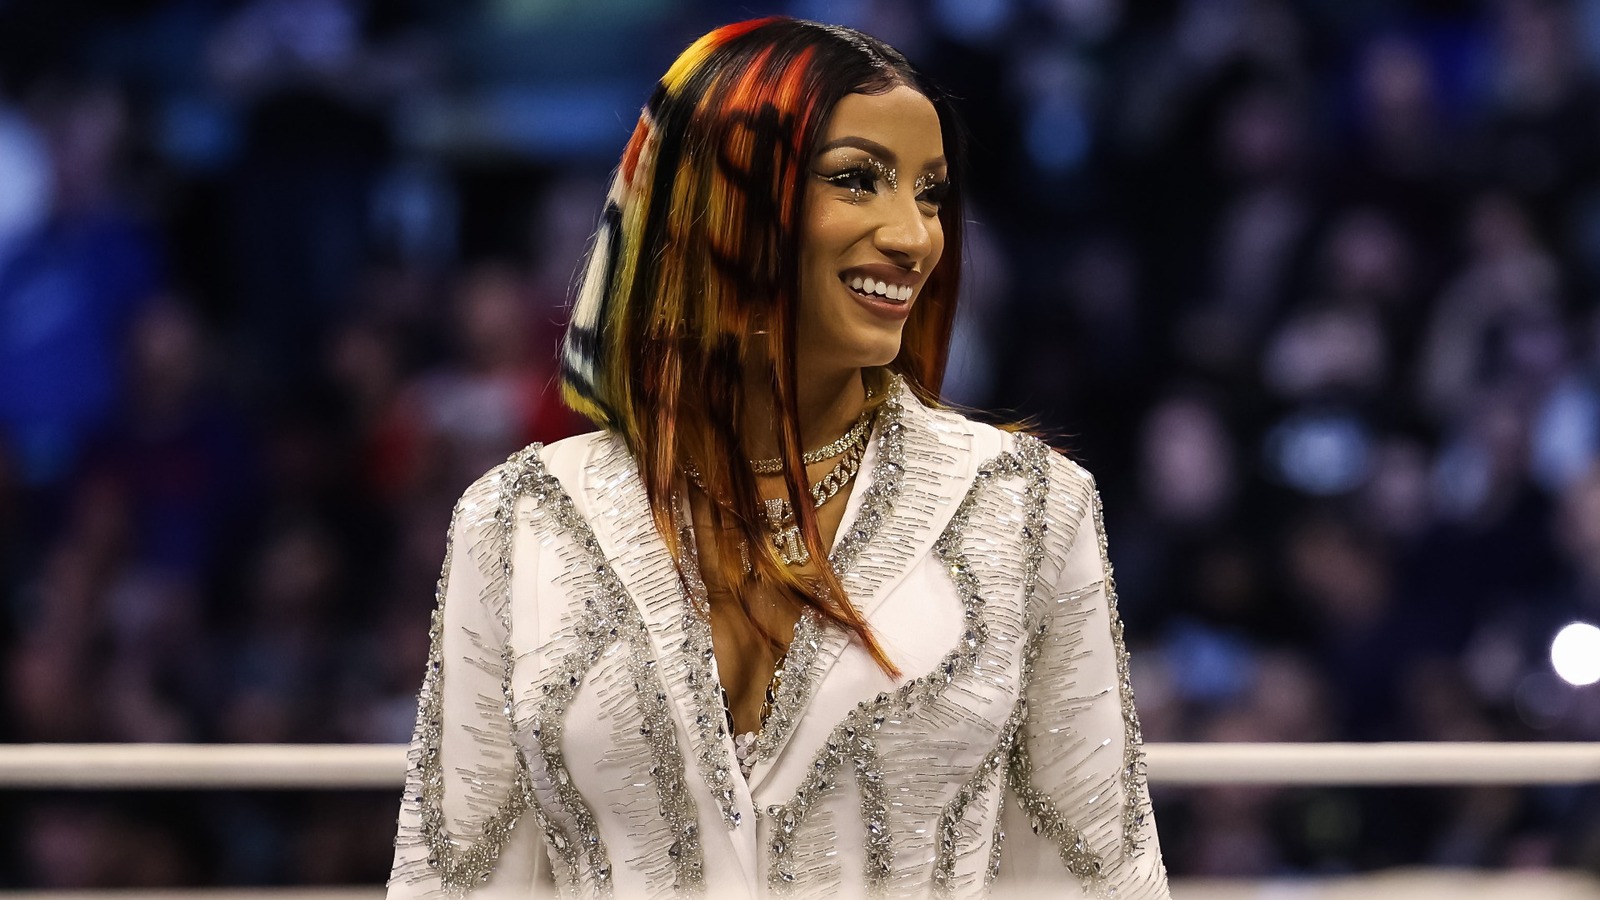 Matt Hardy Explains What He Would've Changed With Mercedes Mone's AEW Debut